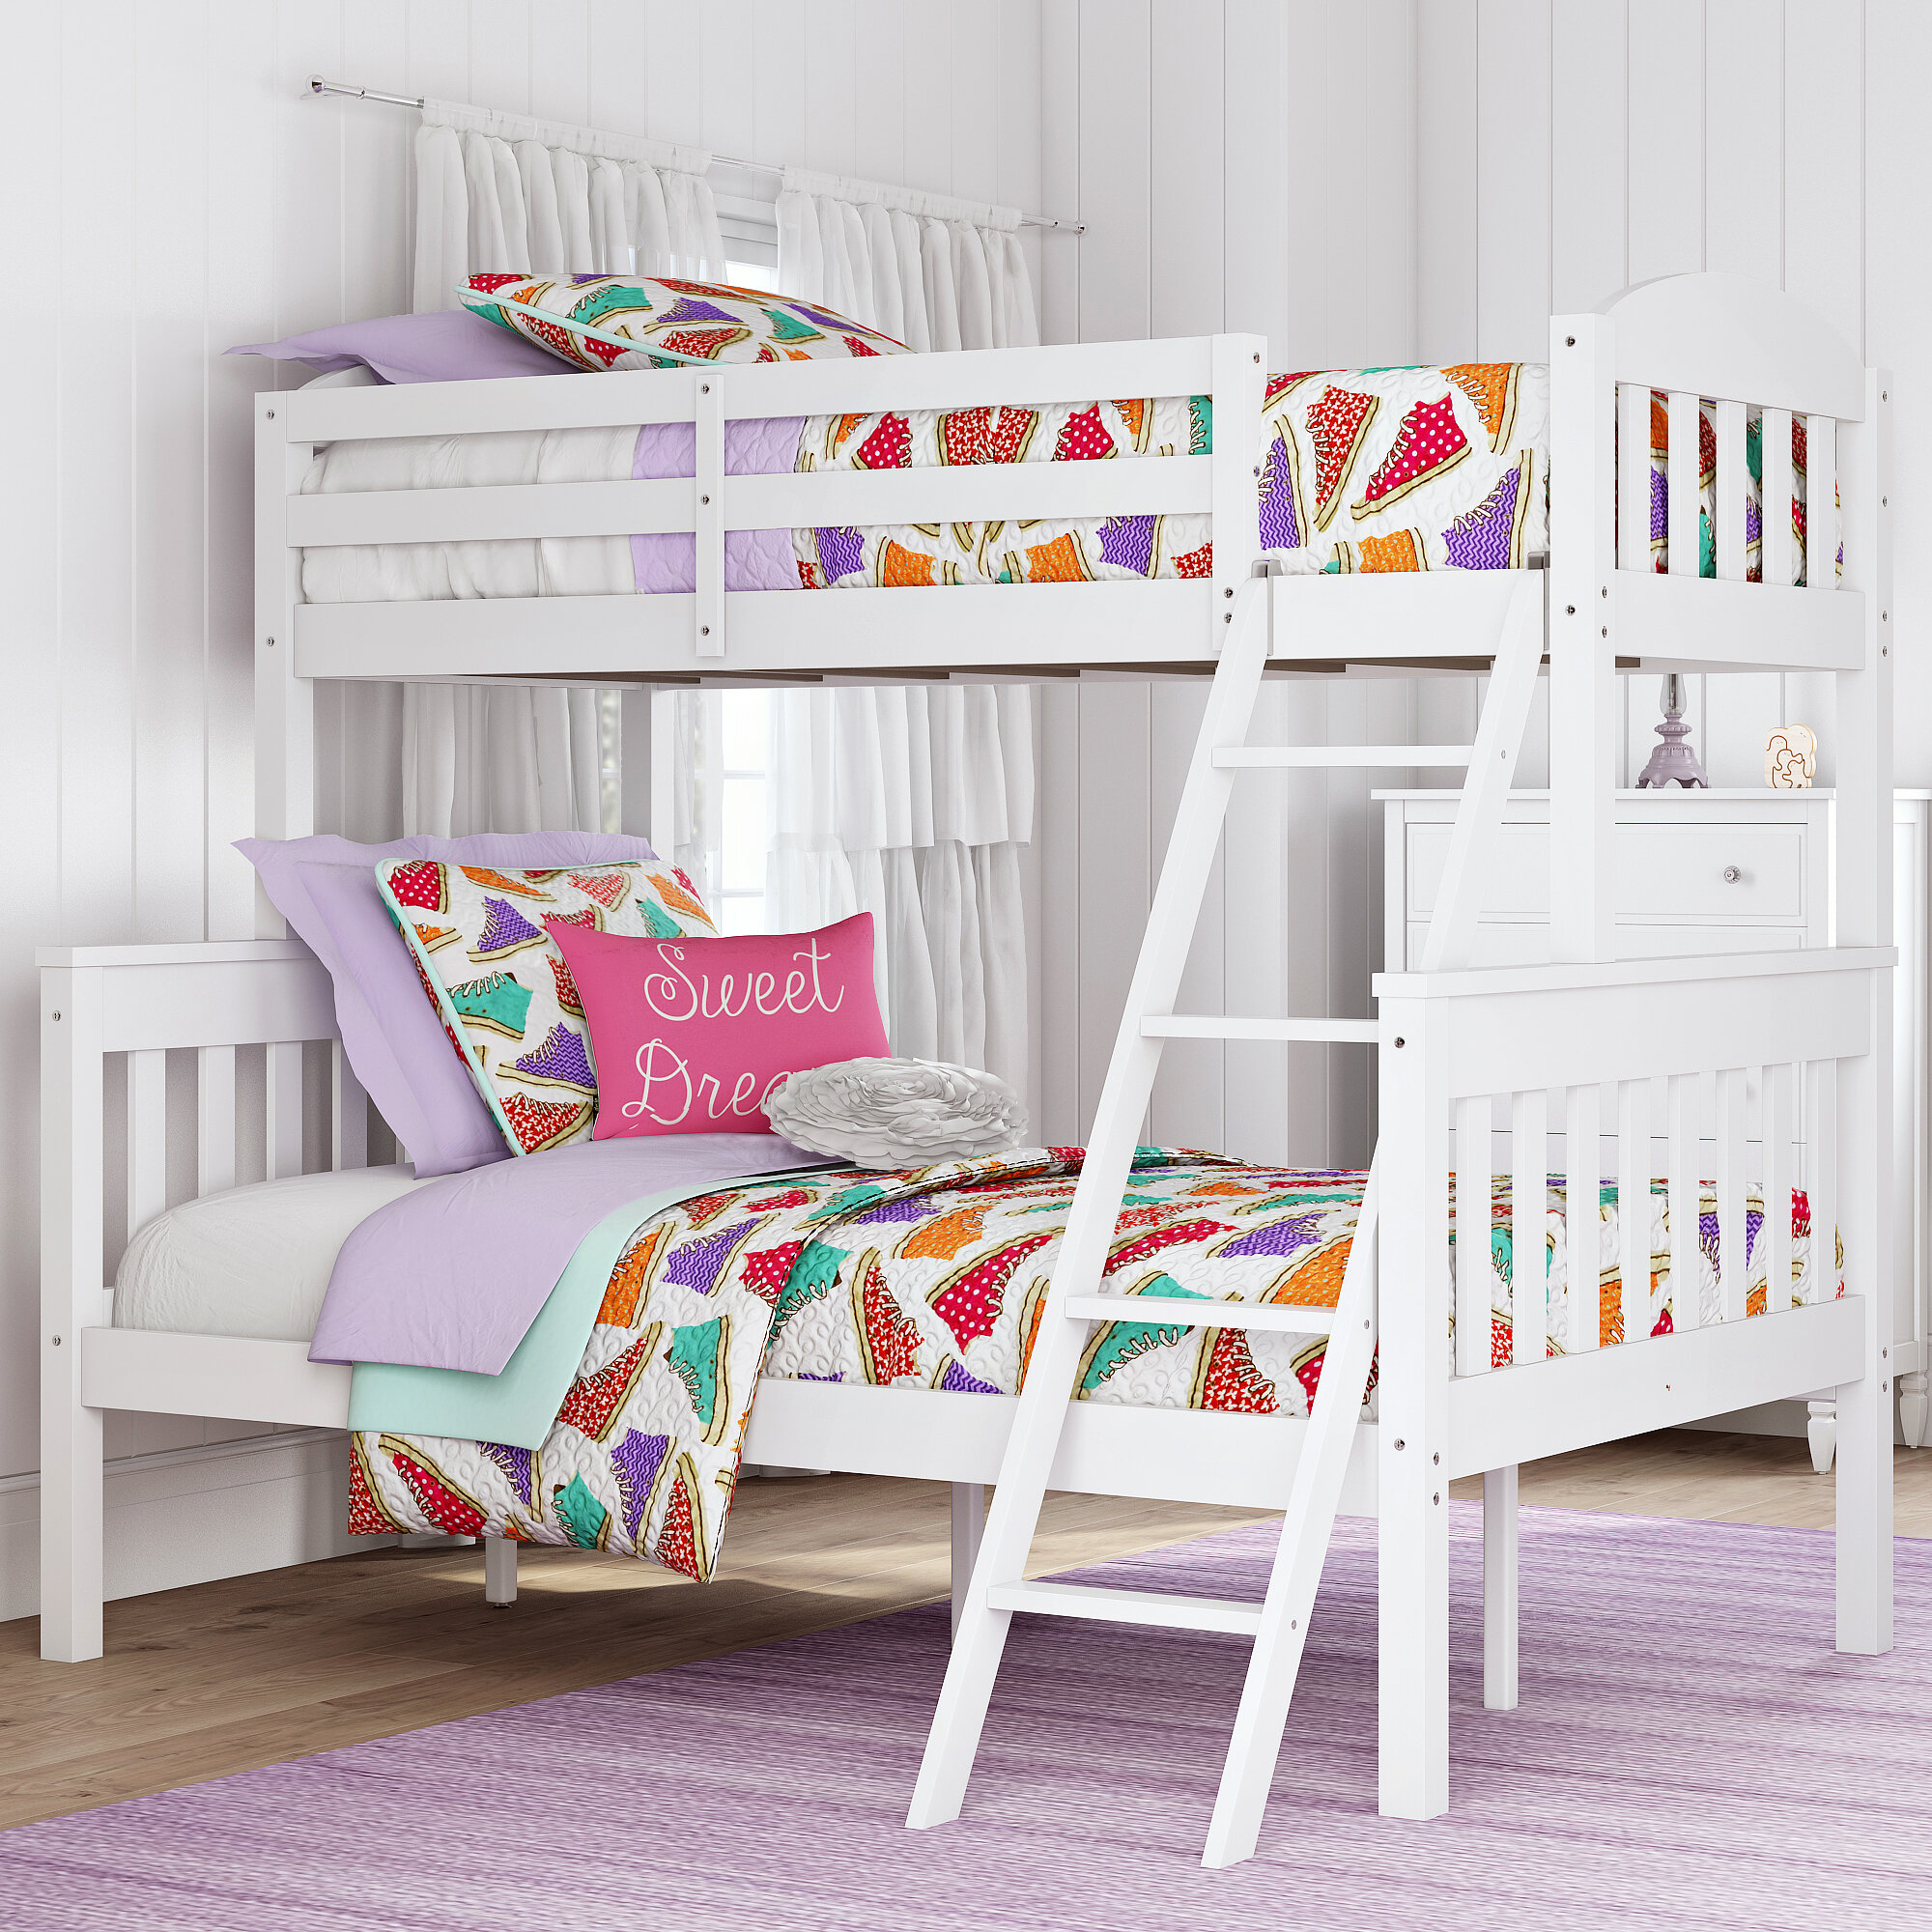 Wayfair Bunk Beds On Sale You Ll Love In 2021